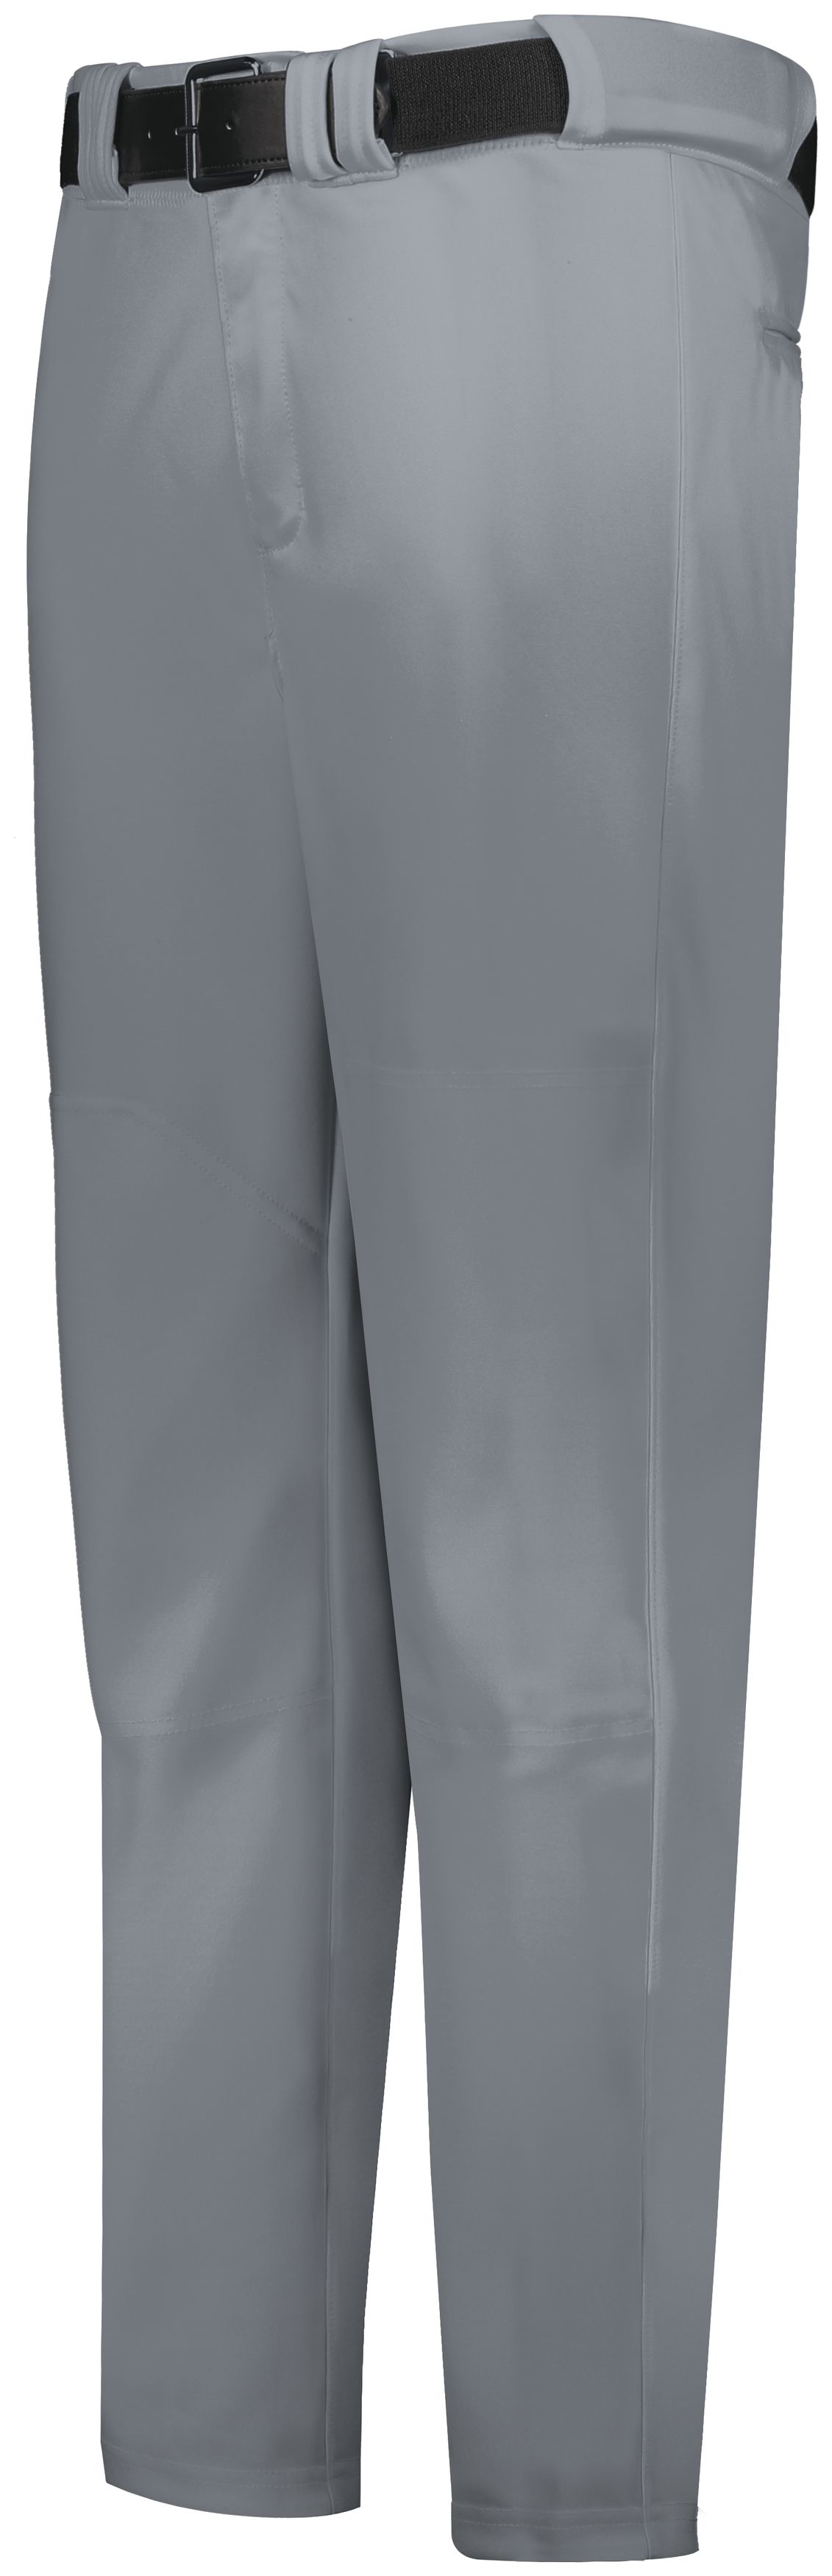 Russell Athletic R13DBB - Youth Solid Change Up Baseball Pant